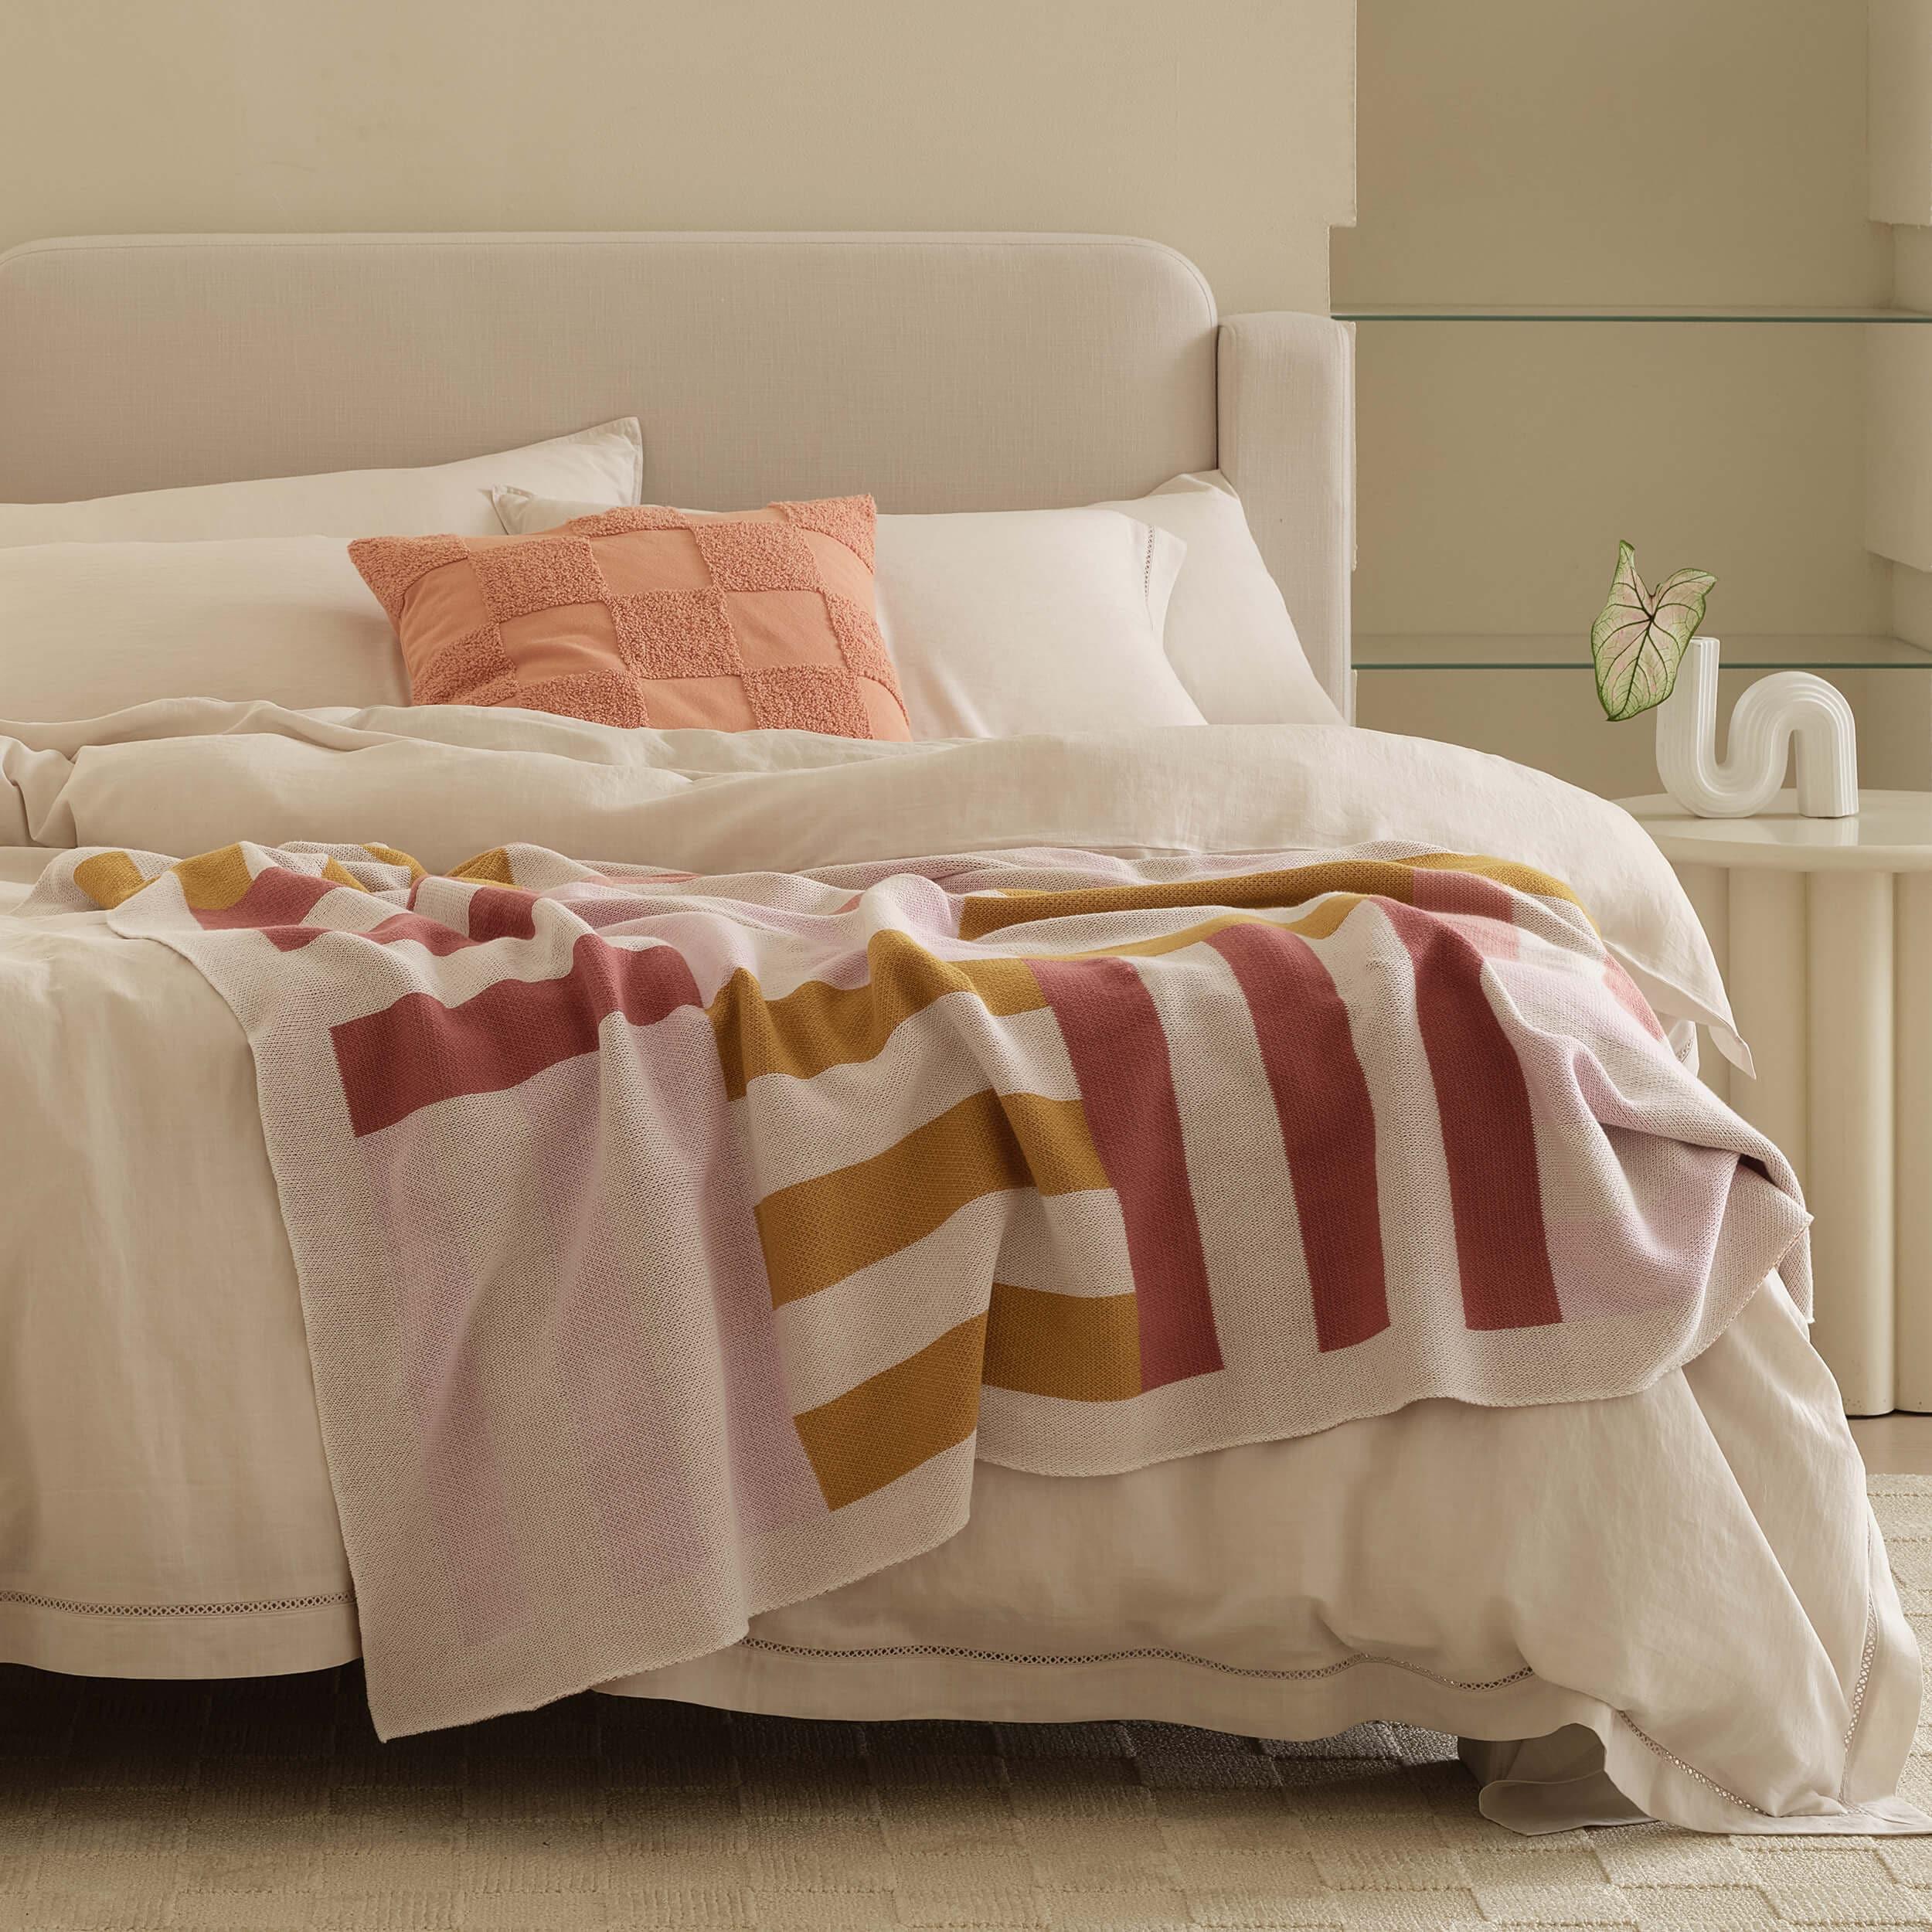 The Intarsia knit throw blanket is crafted with precision and attention to detail, making it a high-quality product.